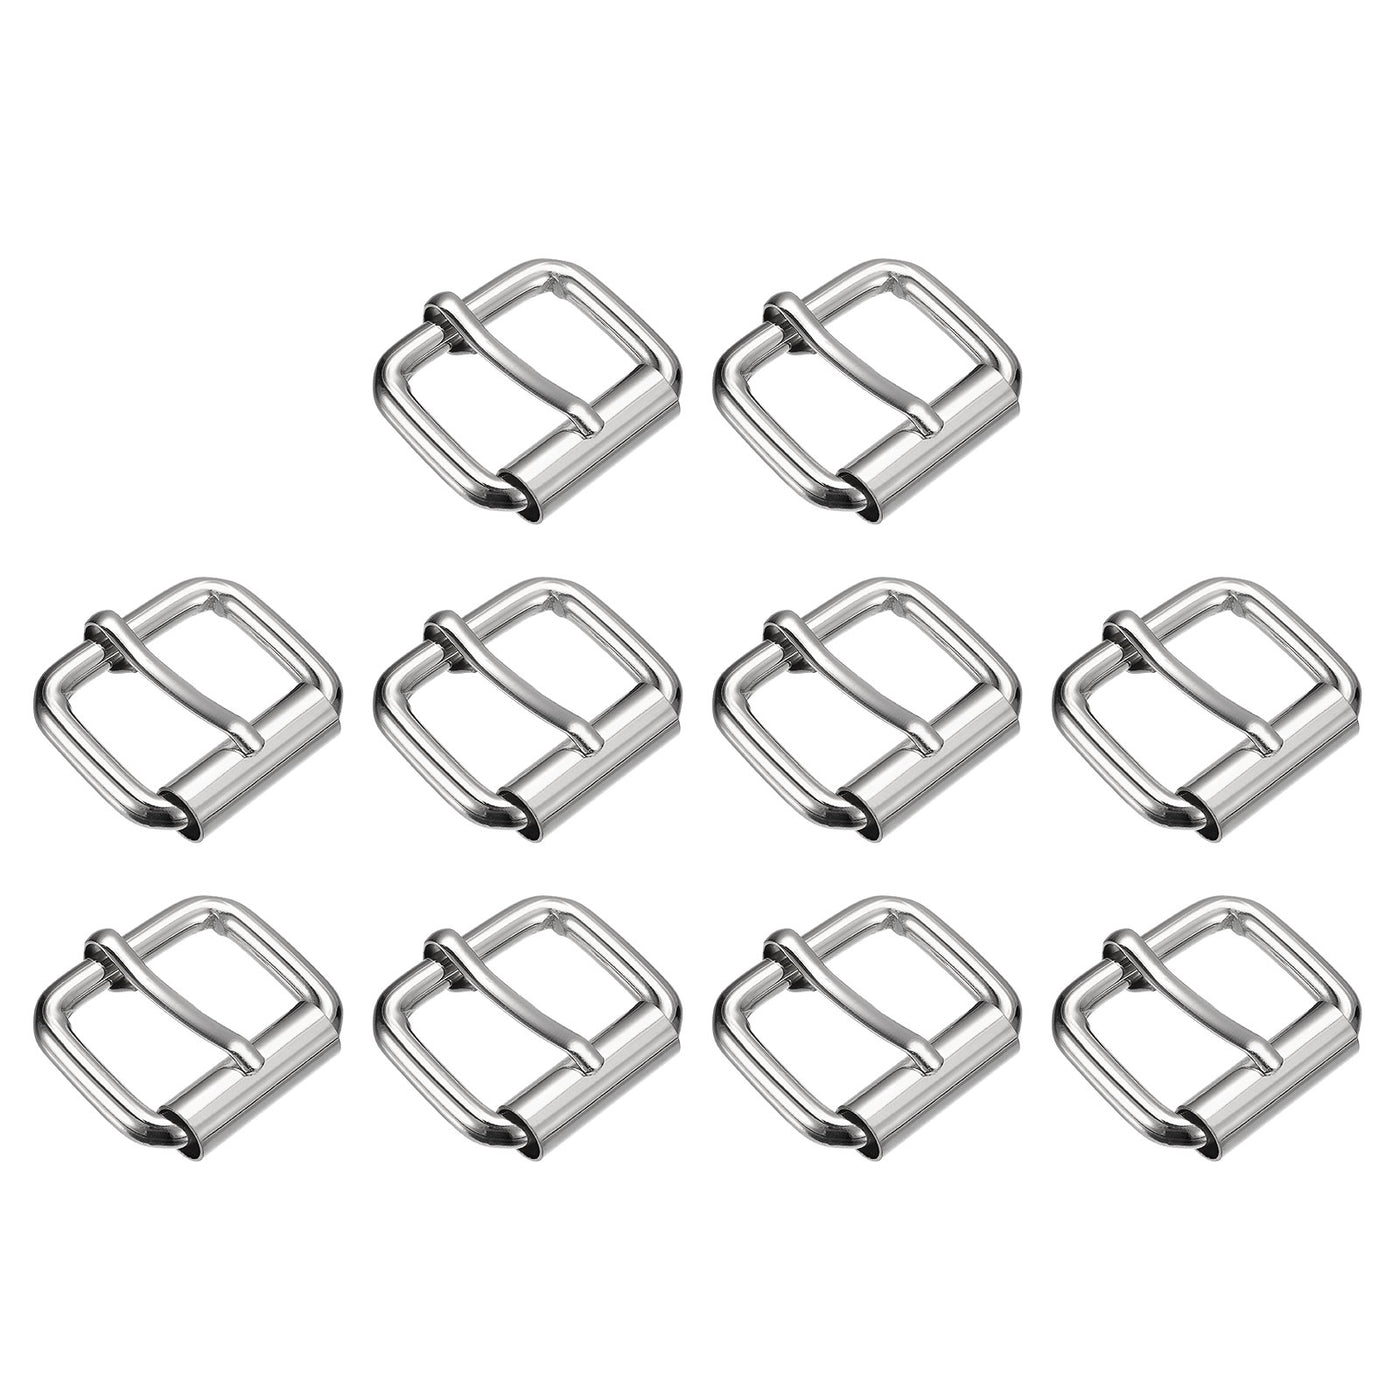 uxcell Uxcell Roller Buckles, 25pcs 25x20mm 4.8mm Thick Metal Belt Pin Buckle, Silver Tone